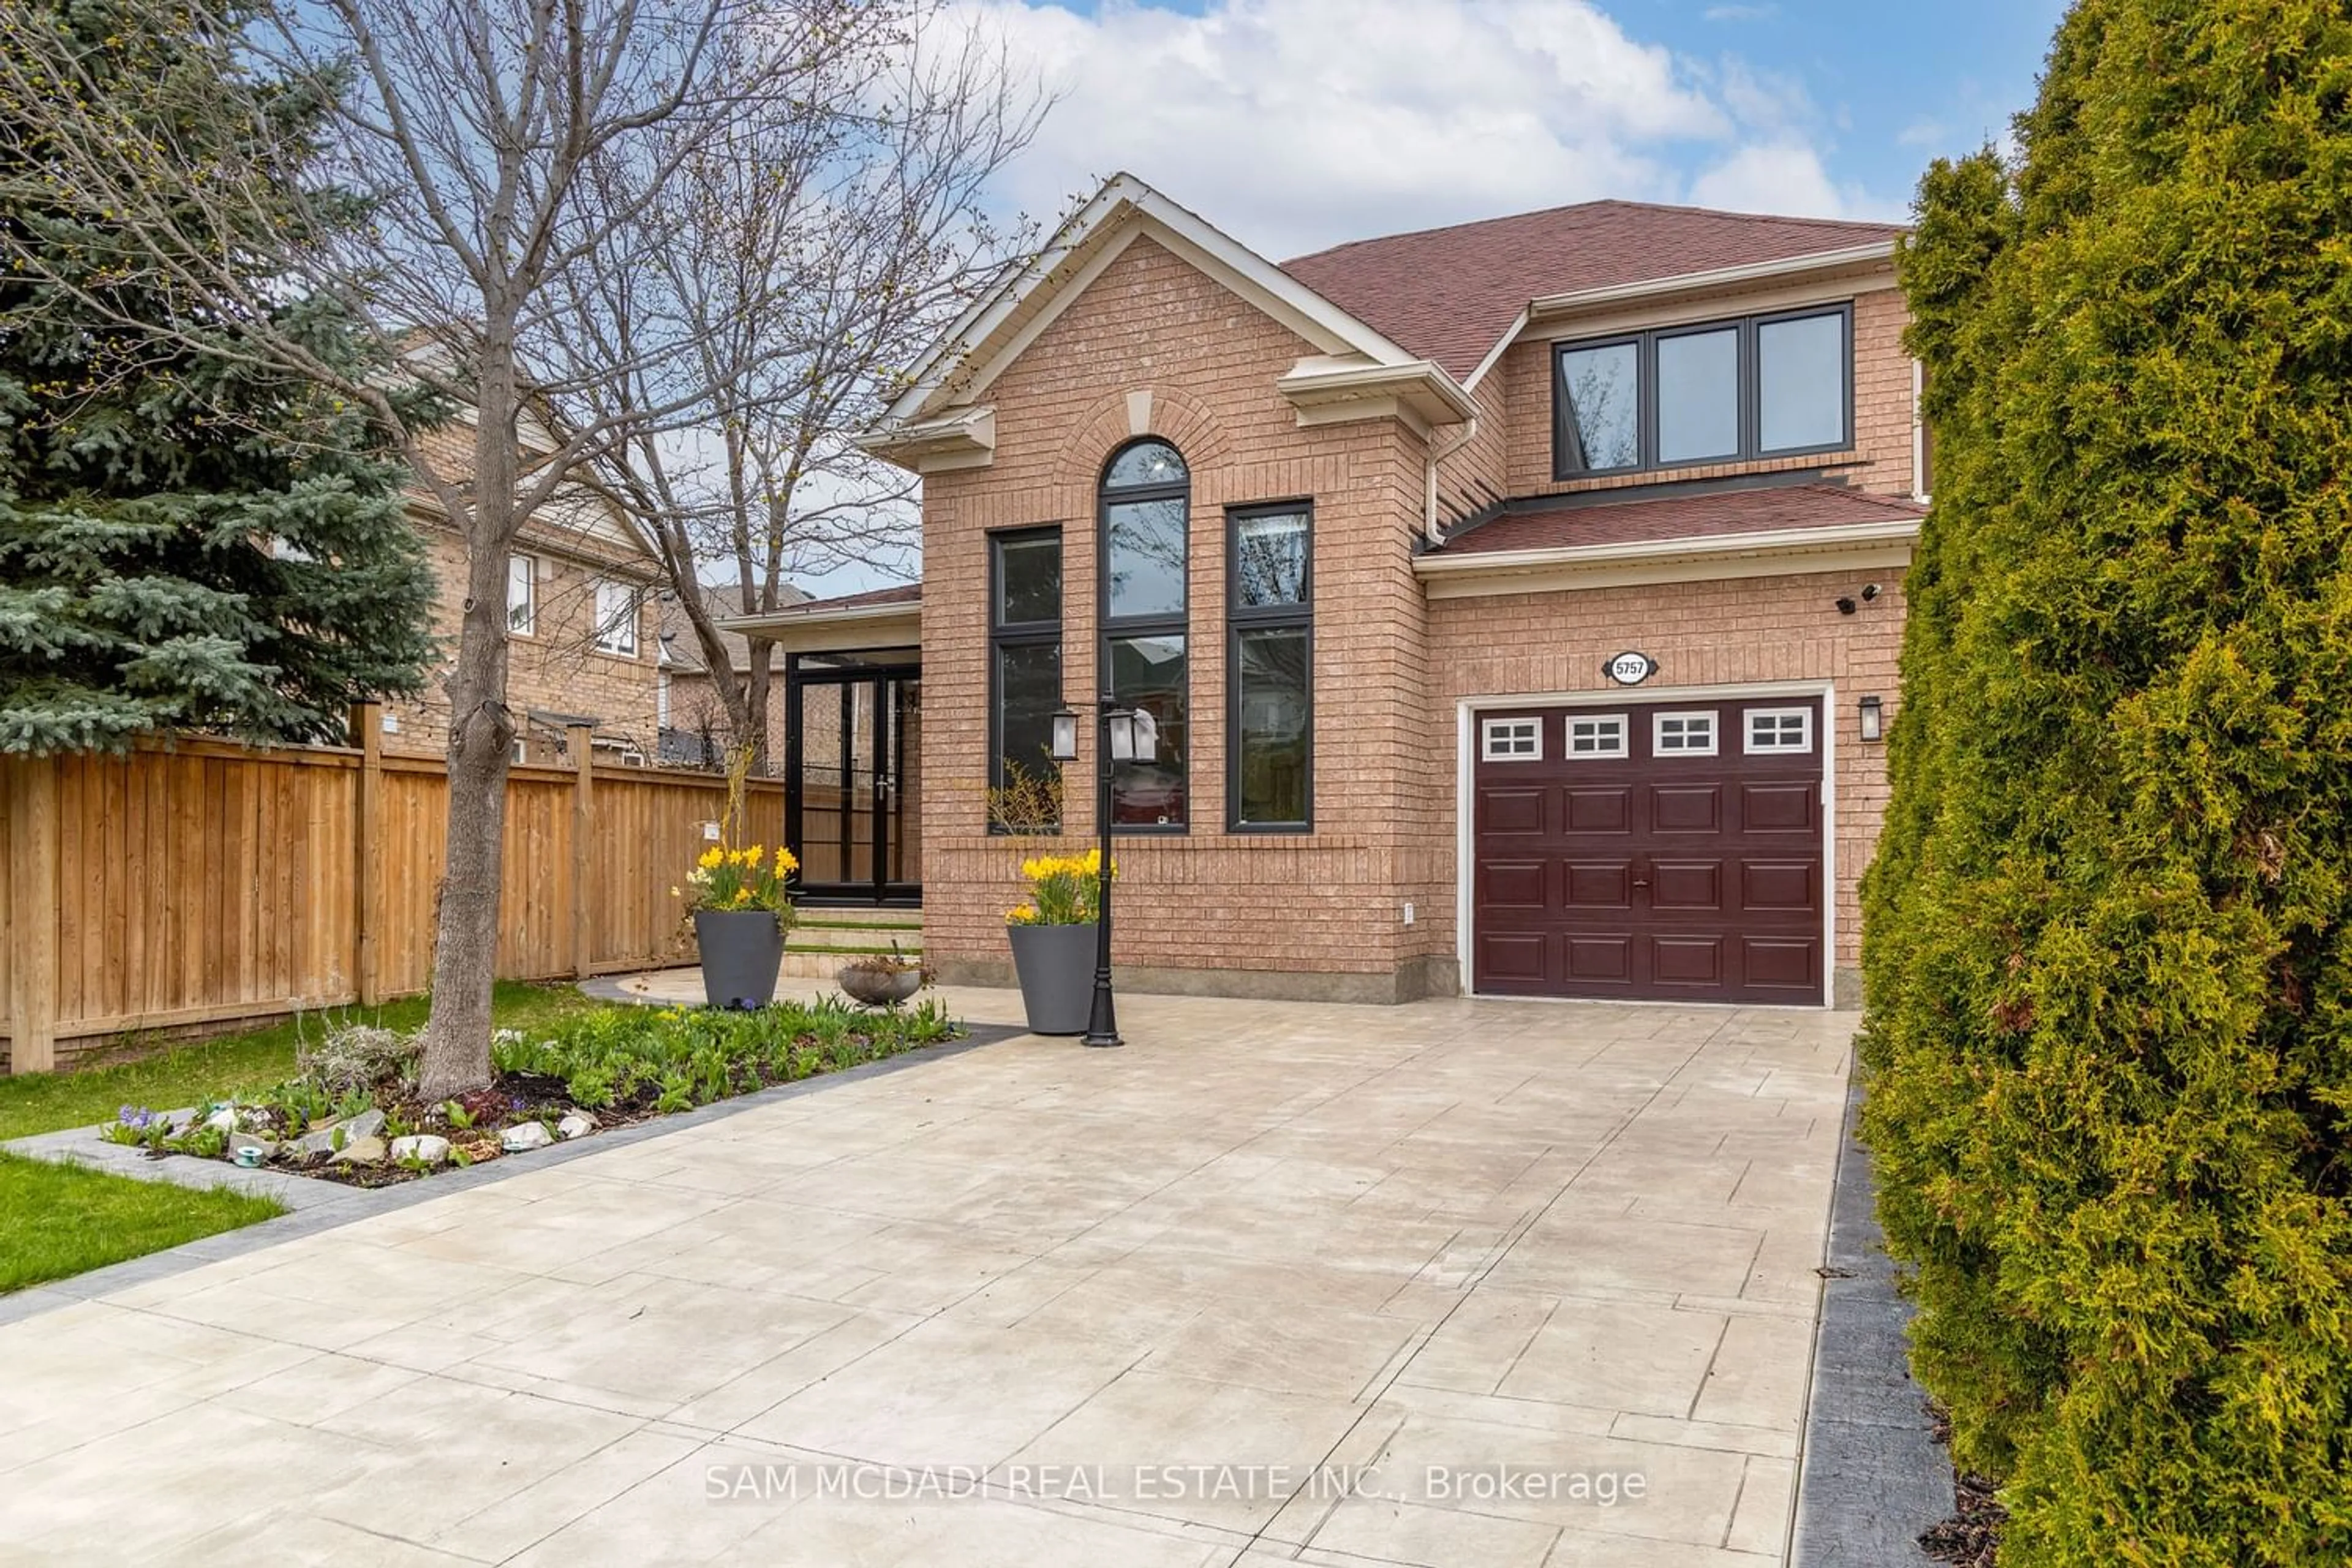 Home with brick exterior material for 5757 Macphee Rd, Mississauga Ontario L5M 7B2